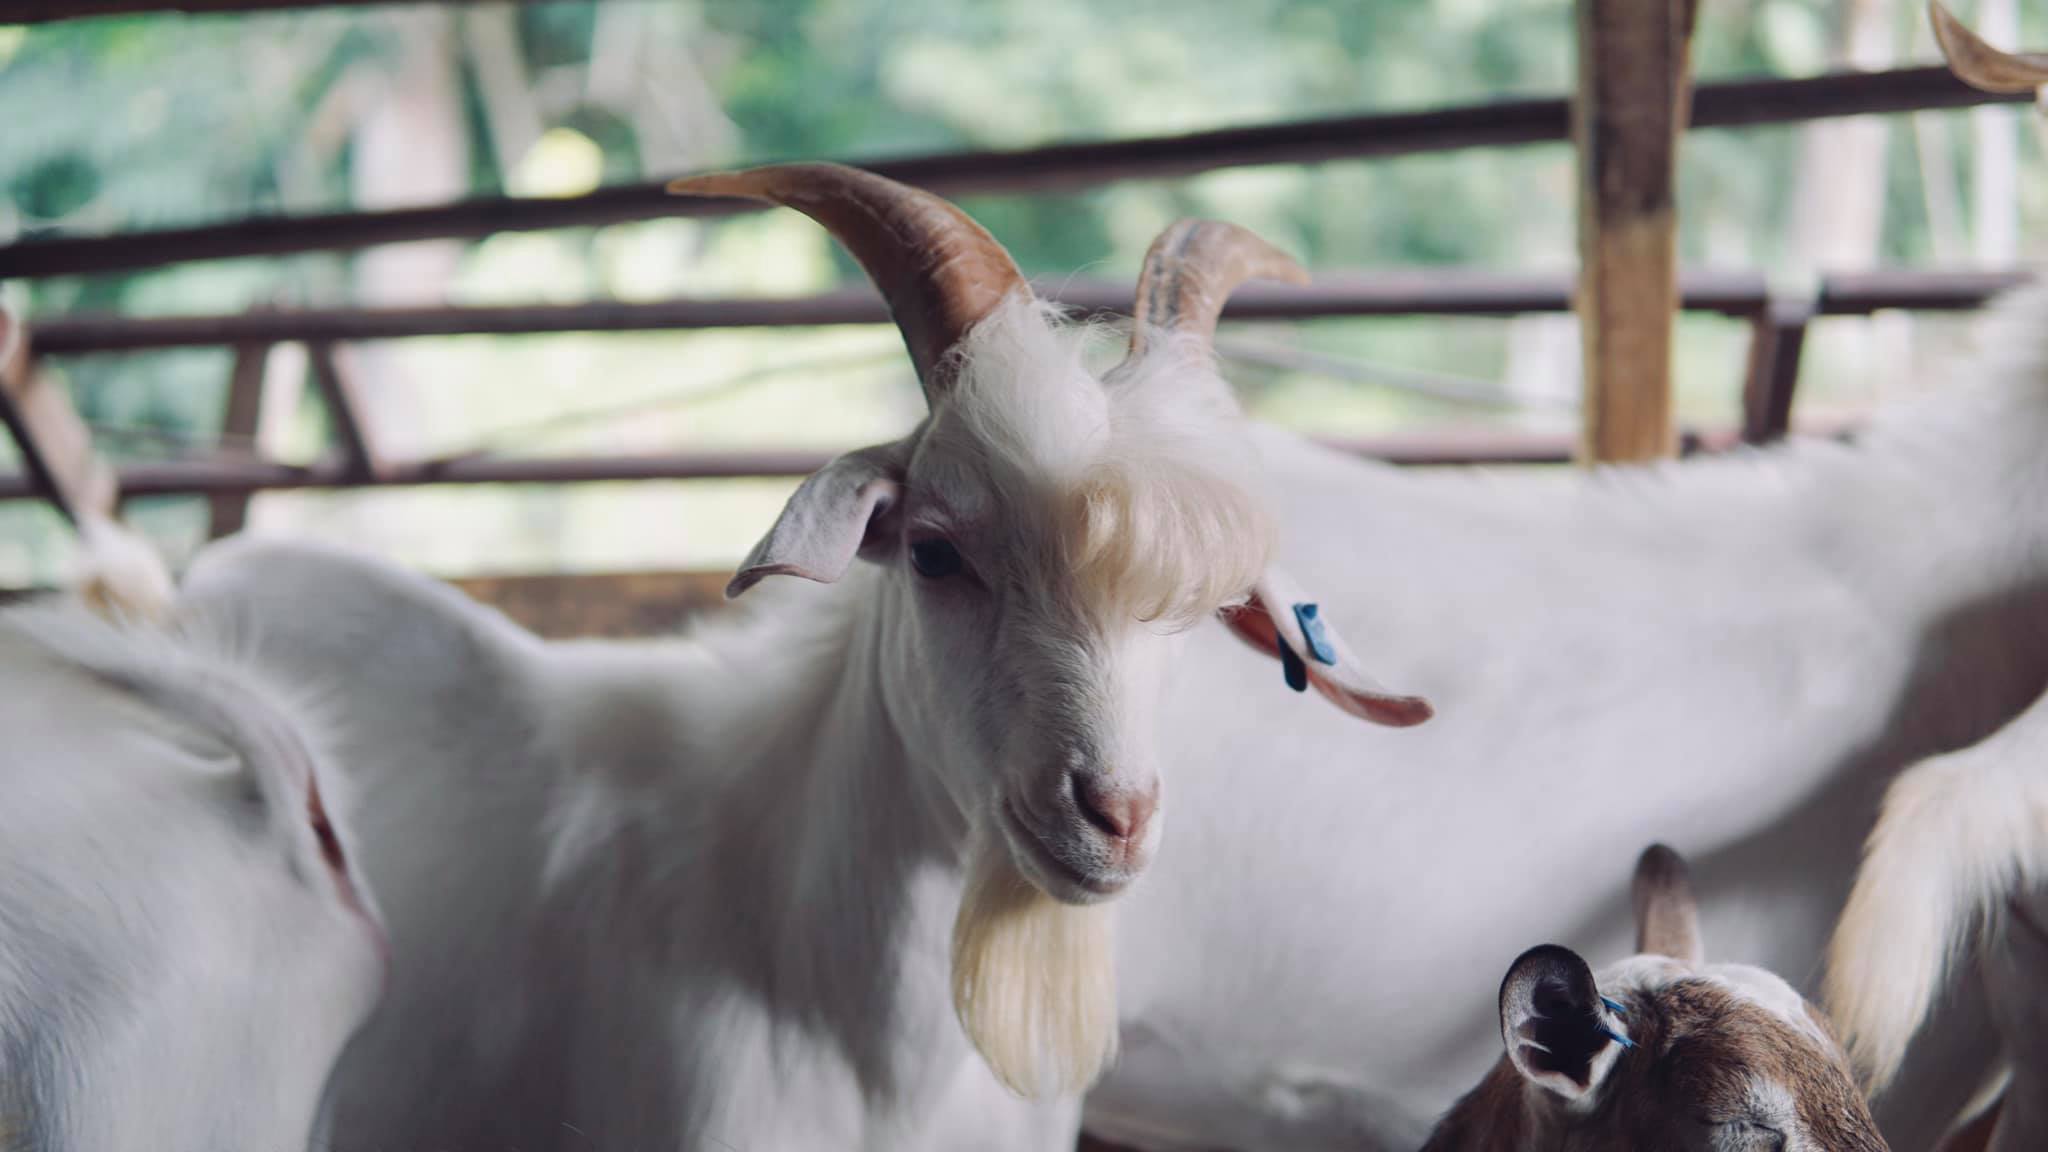 This Handsome Goat Is Your New Favorite Internet Animal | Time